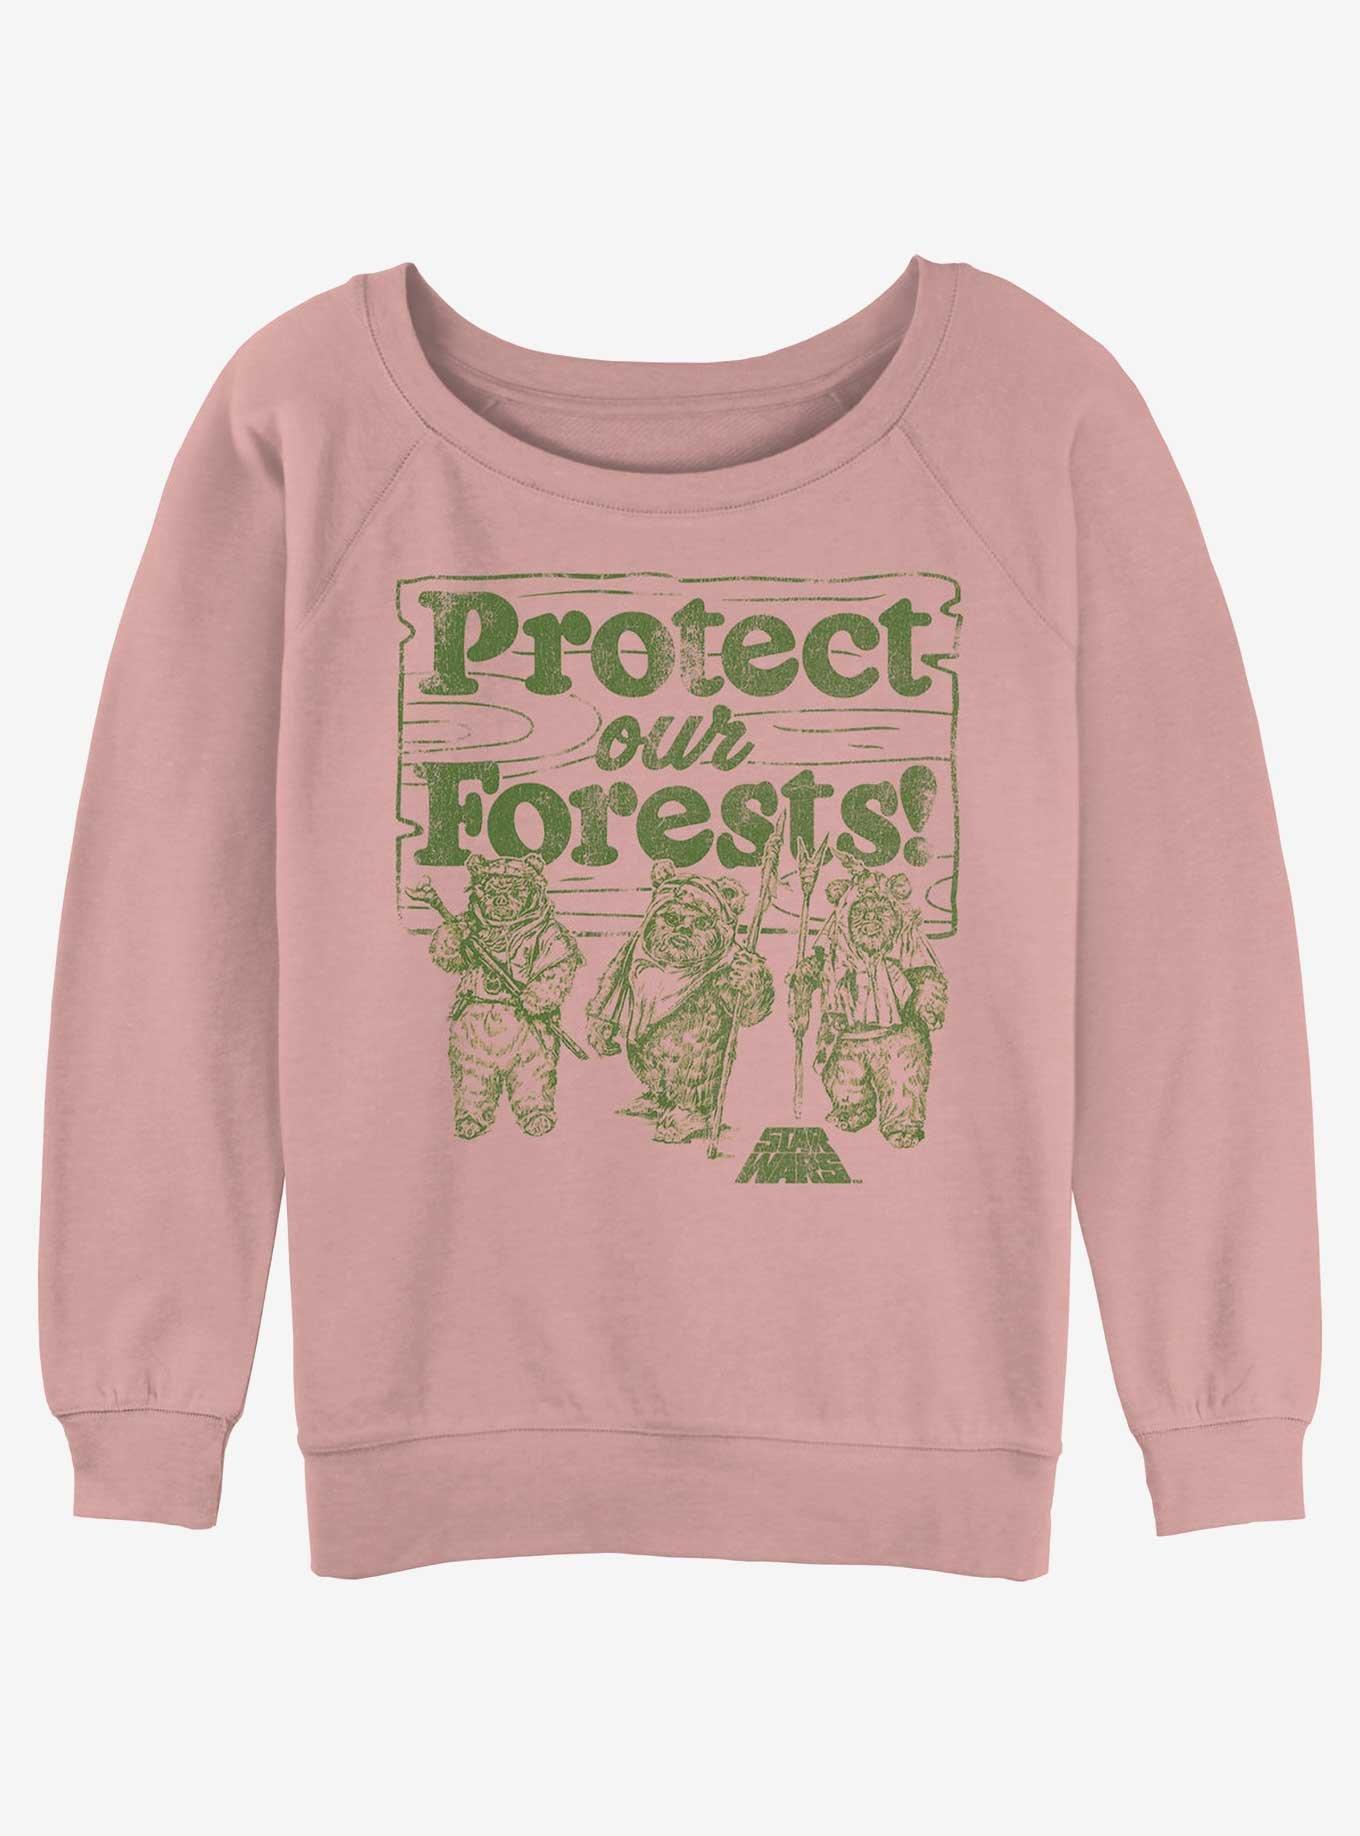 Star Wars Protect Our Forests Girls Slouchy Sweatshirt, DESERTPNK, hi-res